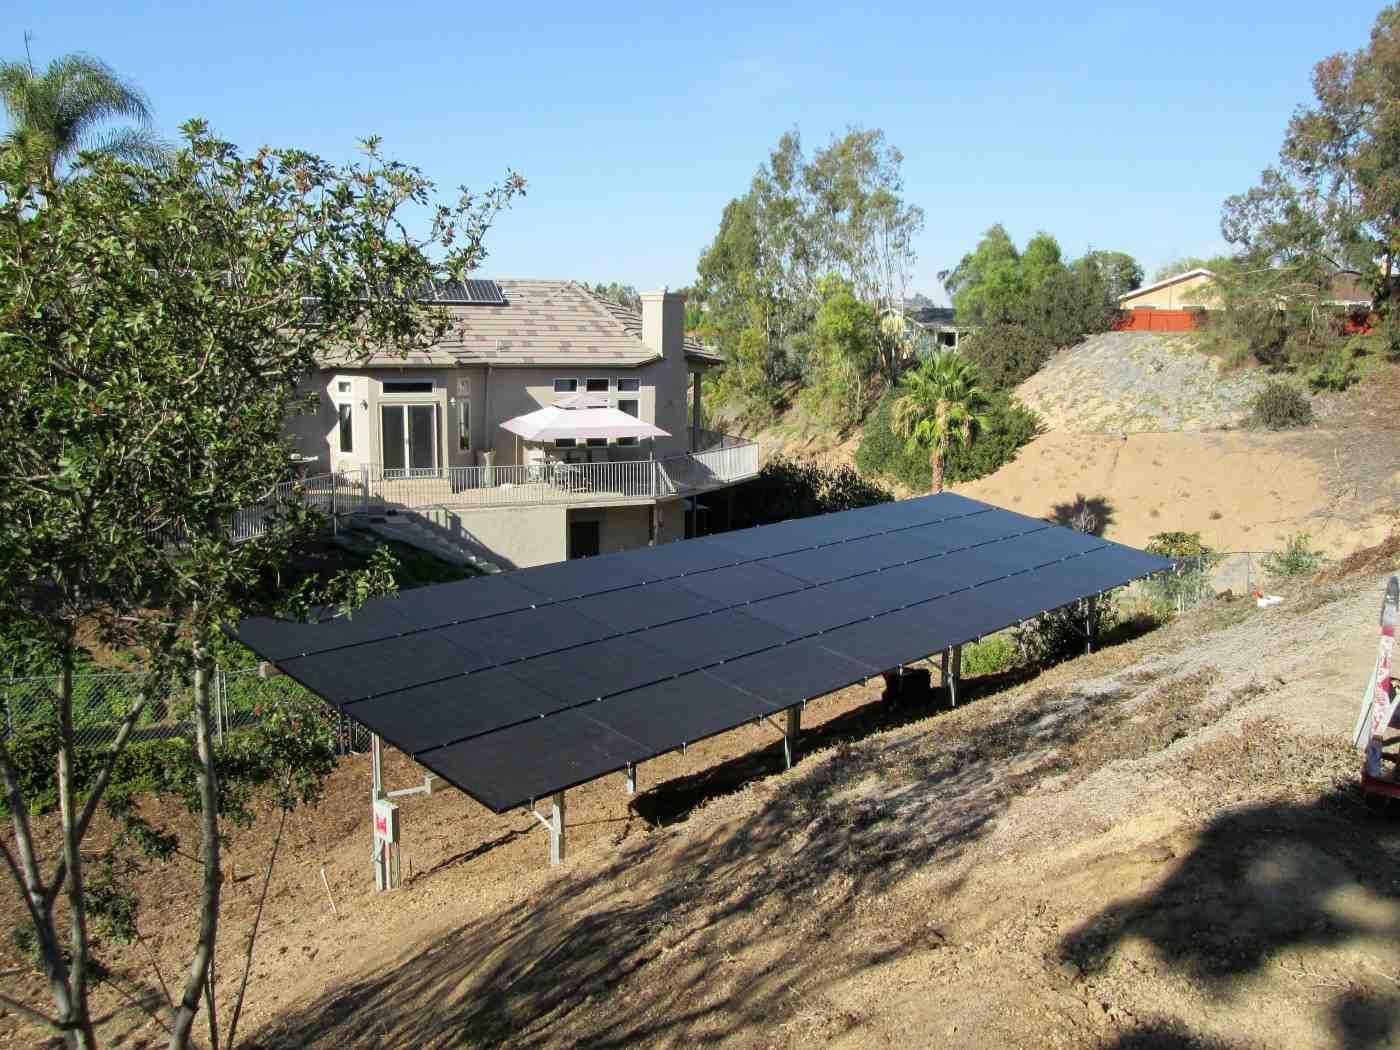 Do ground mounted solar panels need planning permission?